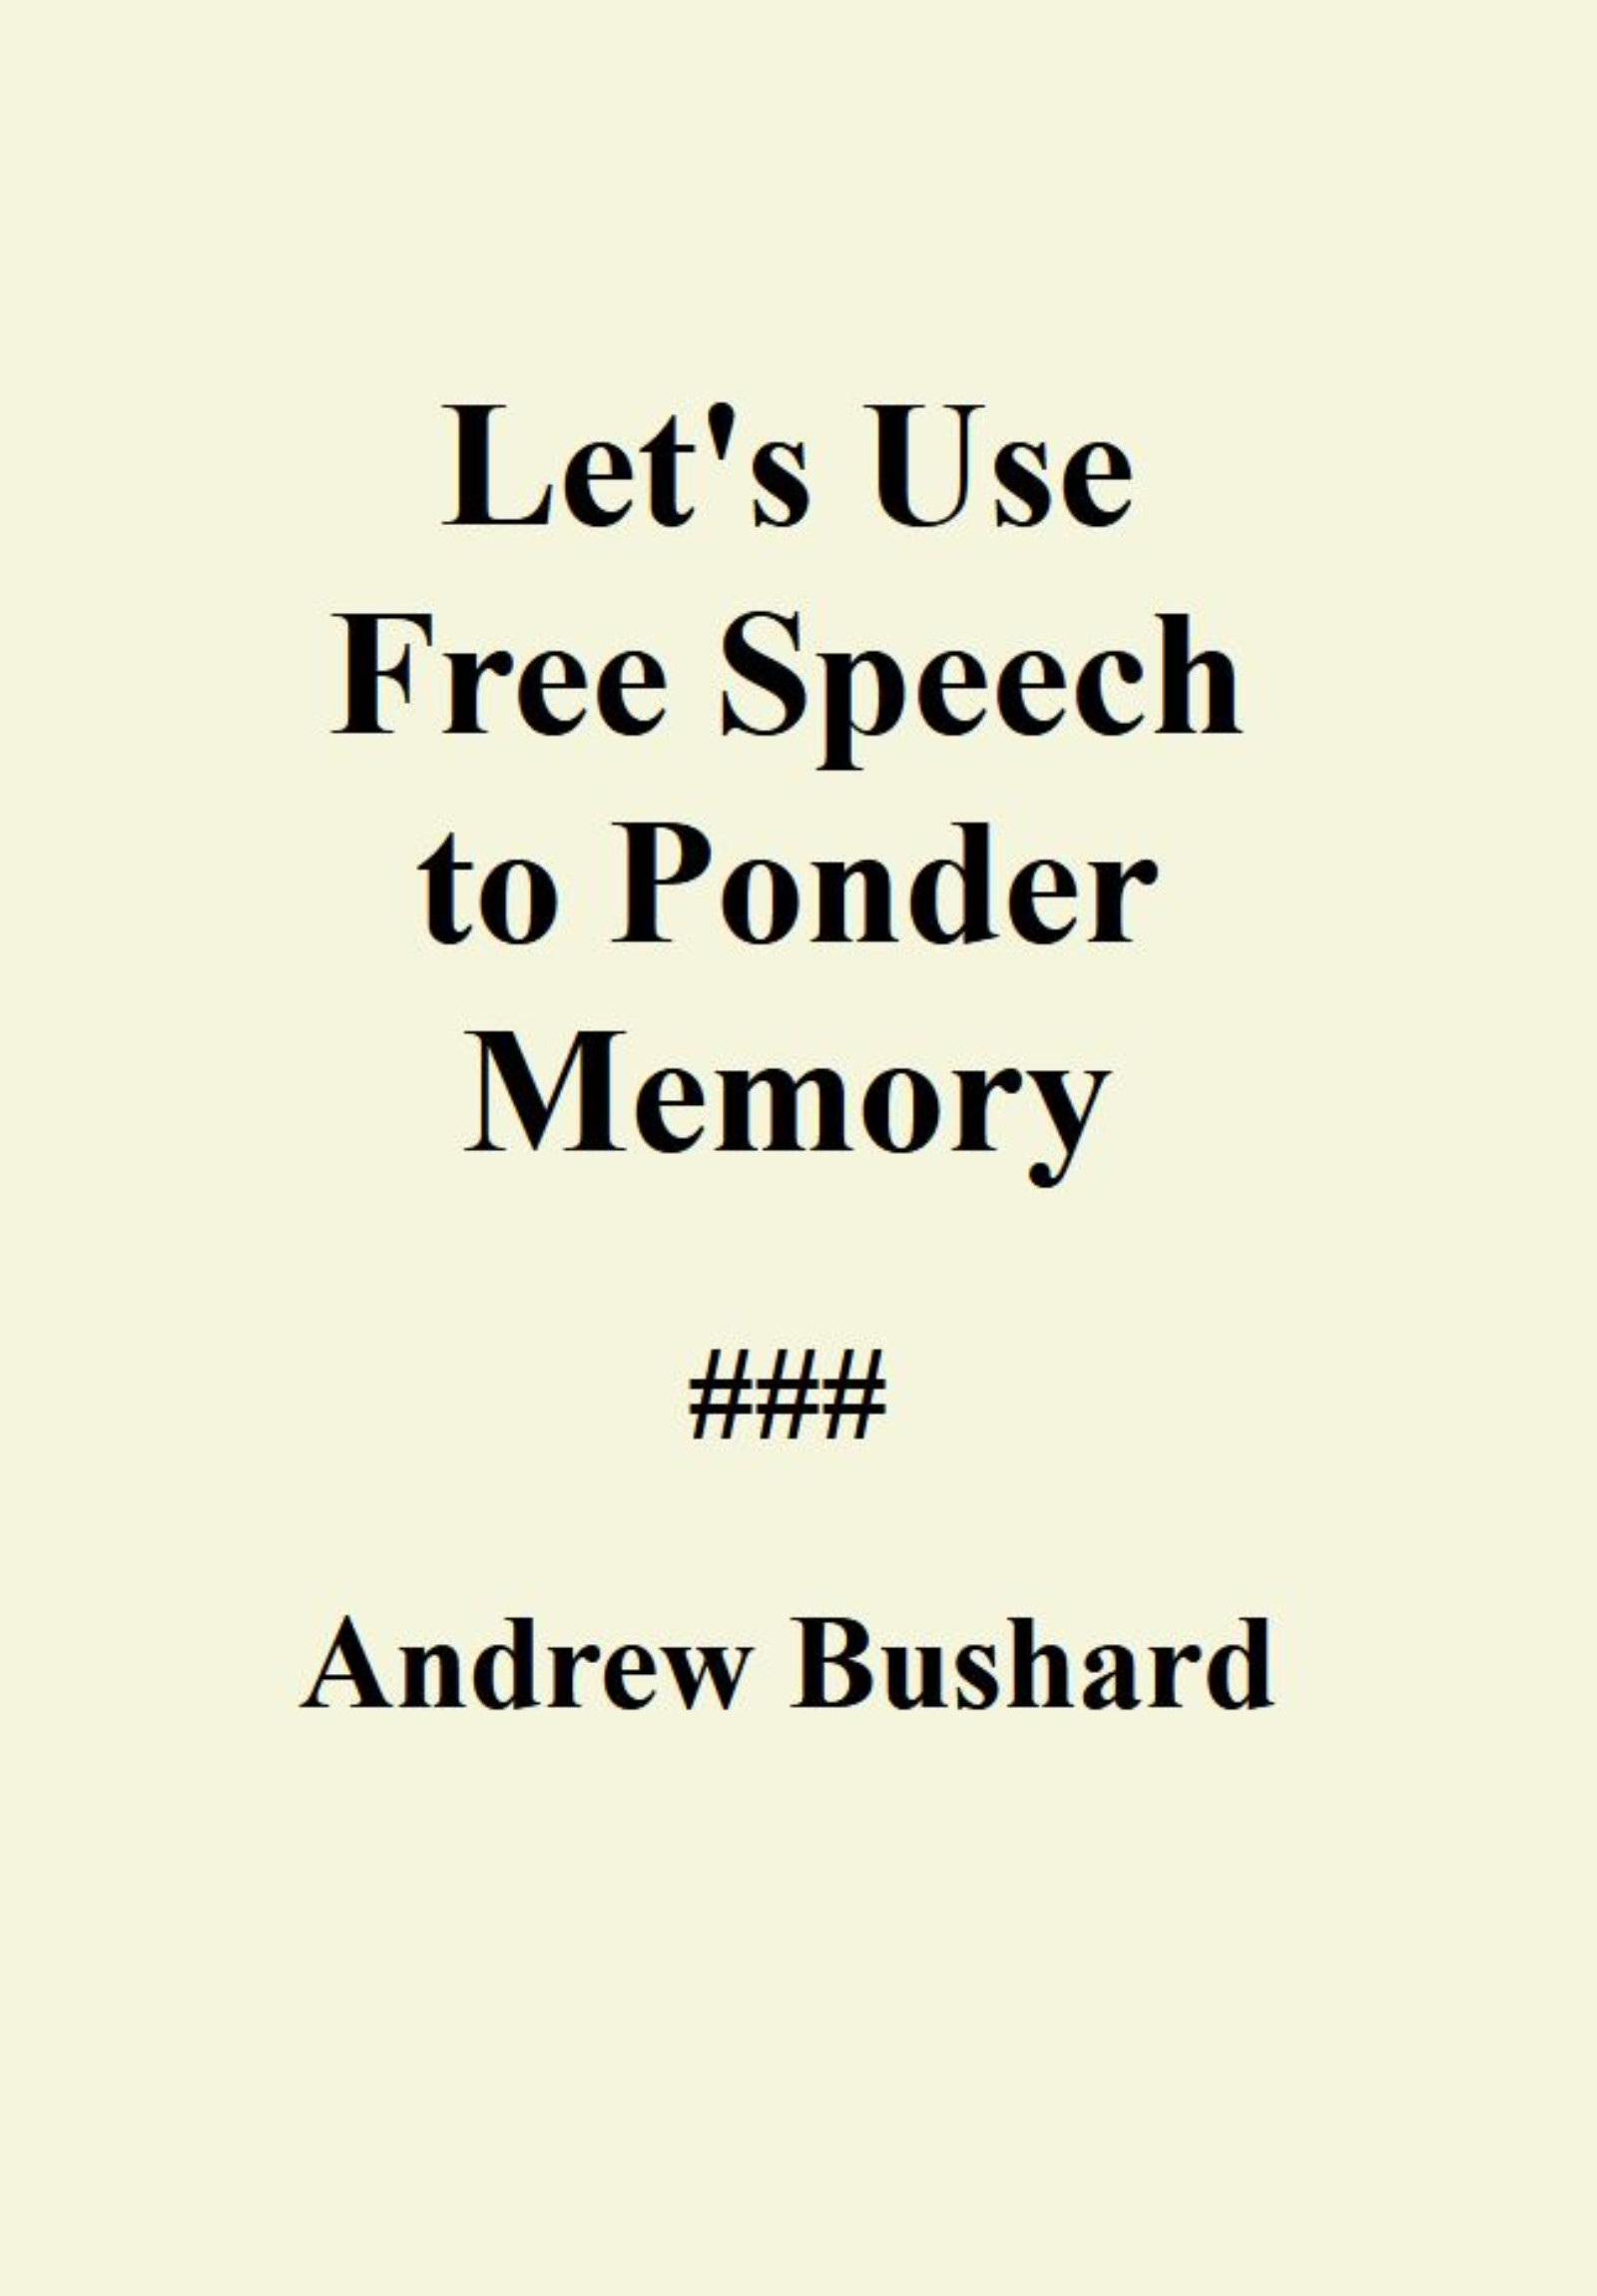 Let's Use Free Speech to Ponder Memory's featured image